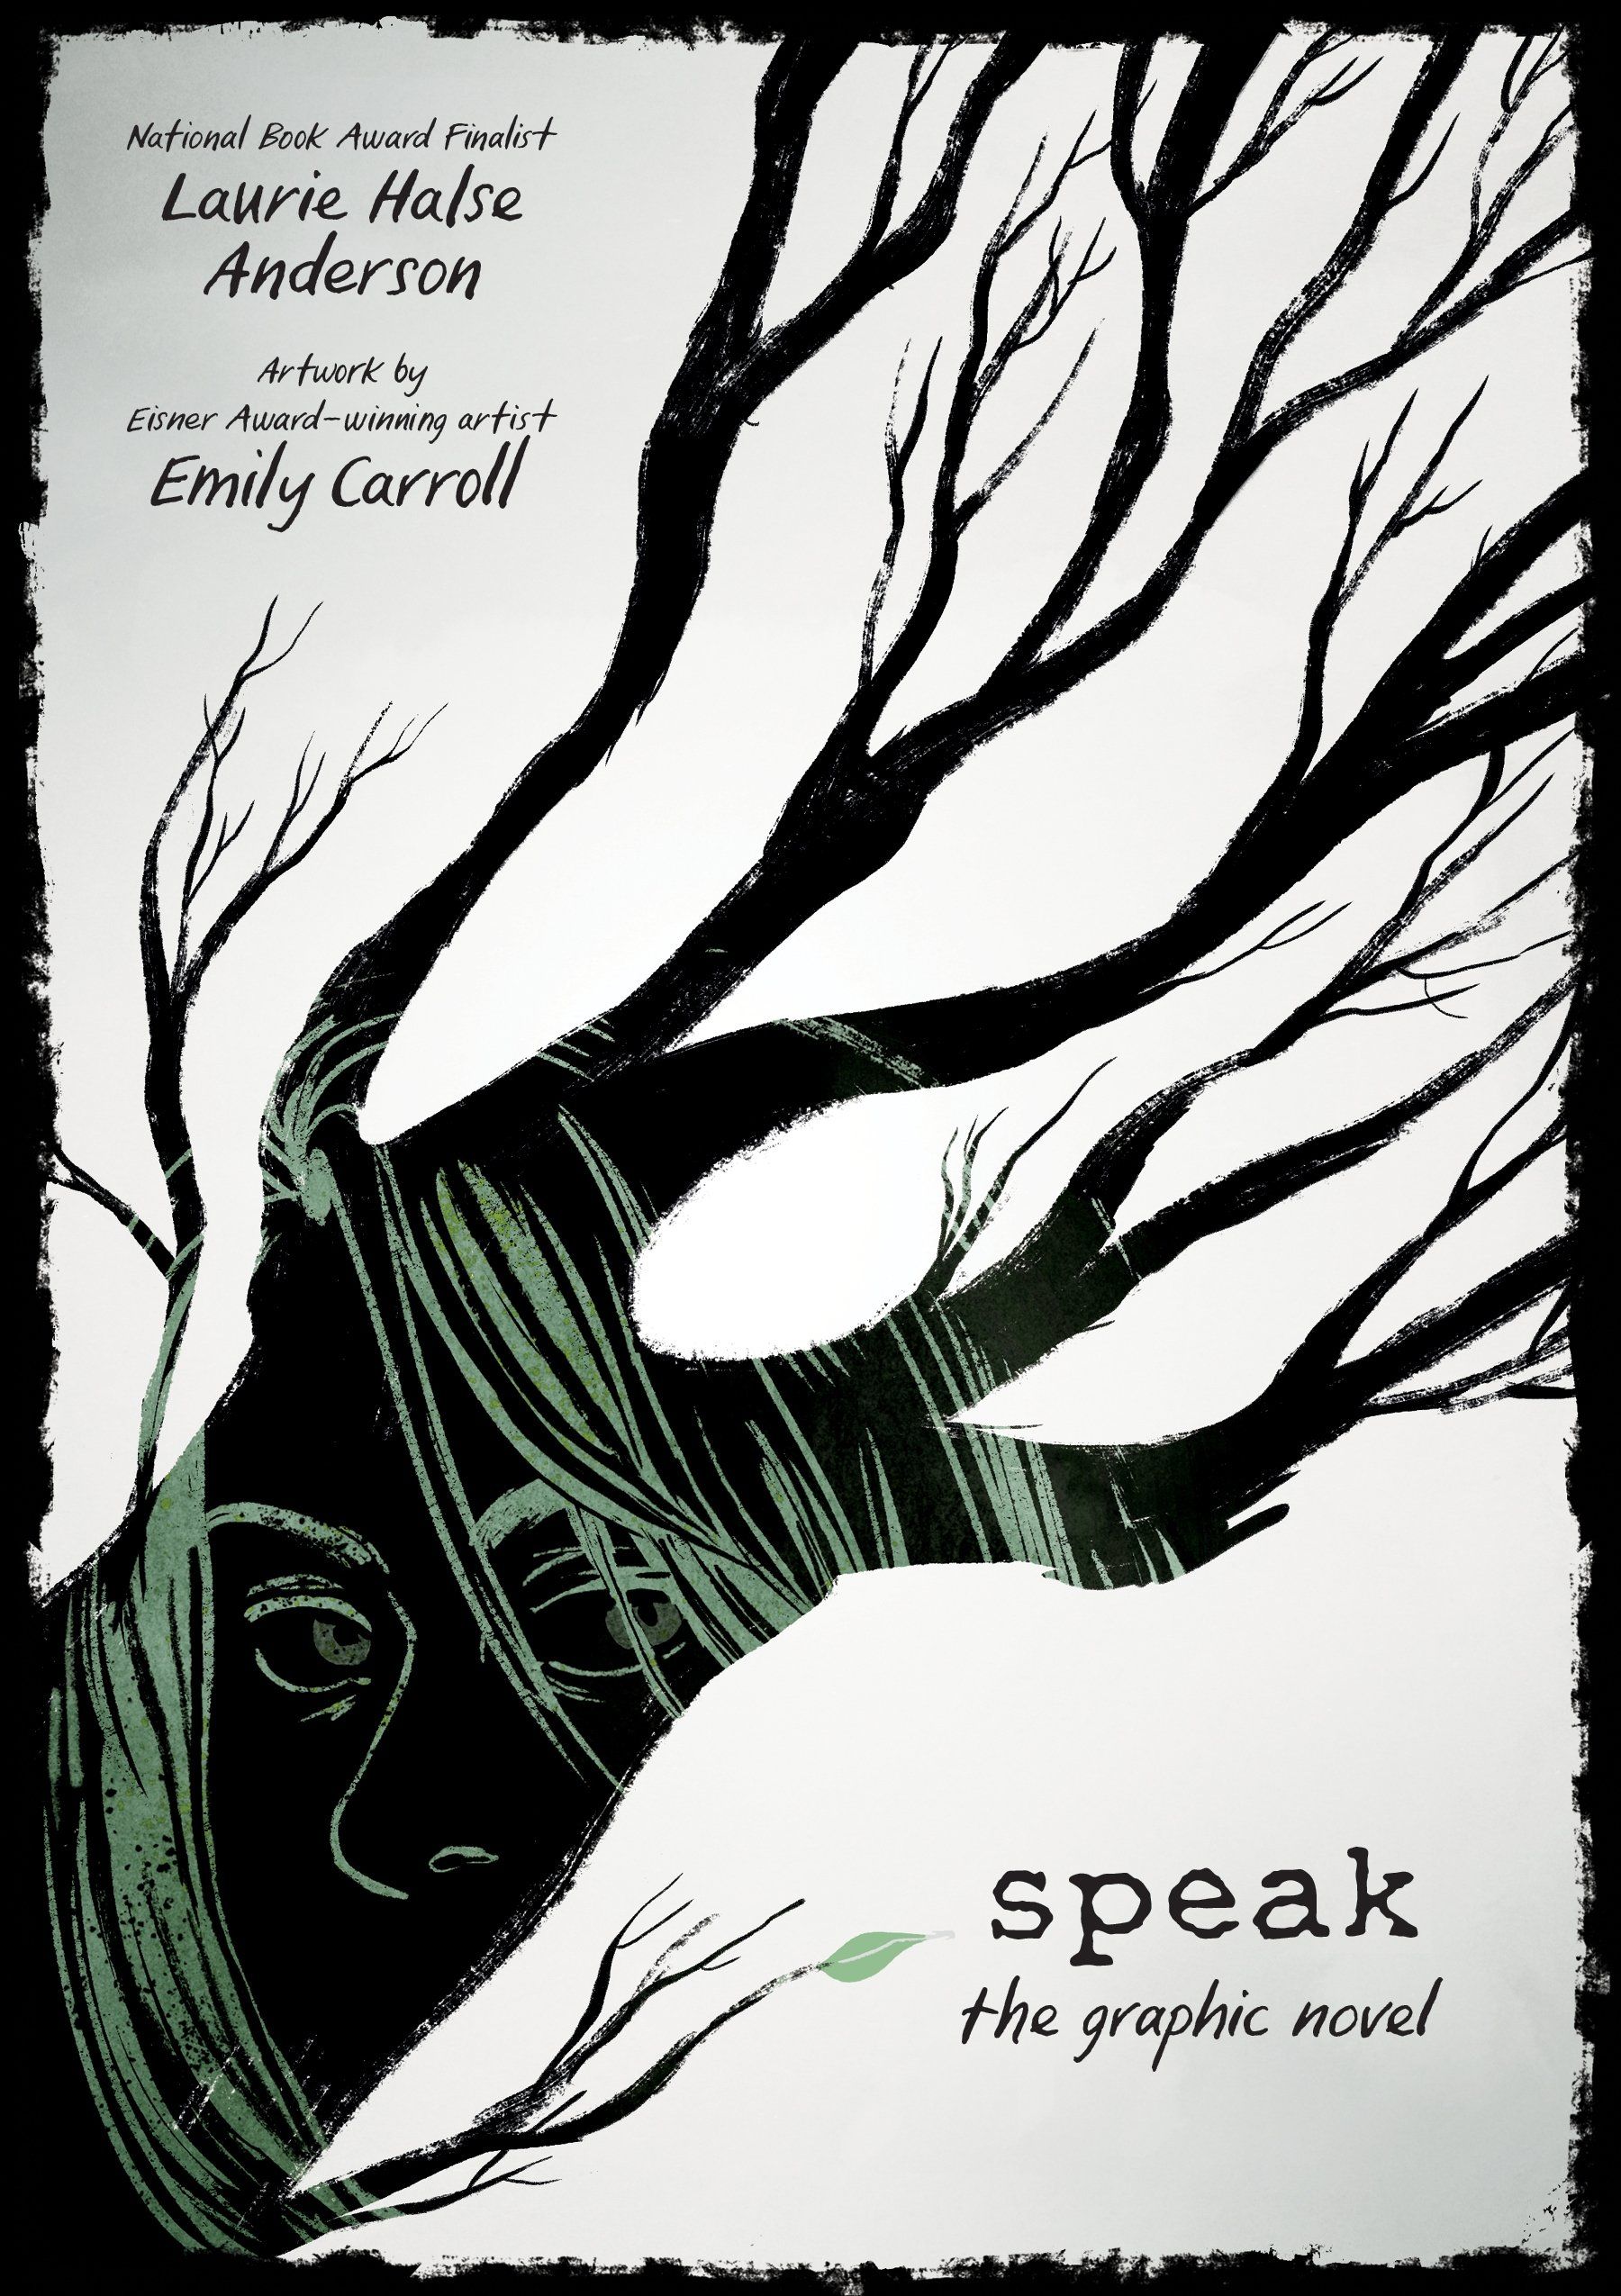 cover of Speak: The Graphic Novel by Laurie Halse Anderson:a black and white illustration of a tree with no leaves